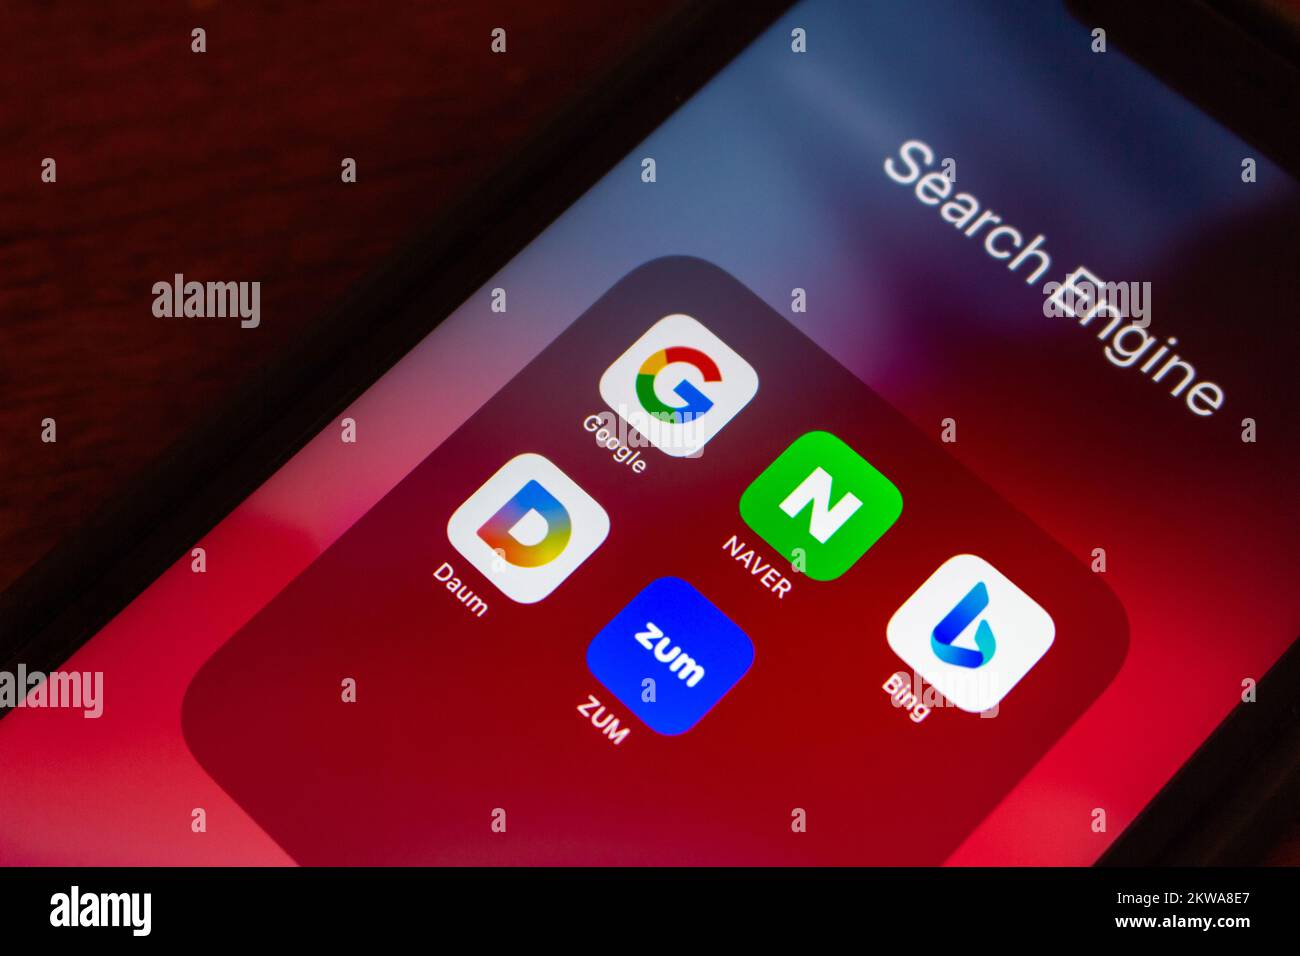 Vancouver, CANADA - Nov 7 2022 : South Korea’s popular internet search engine and web portal icons (Google, Naver, Bing, Daum and Zum) on an iPhone. Stock Photo